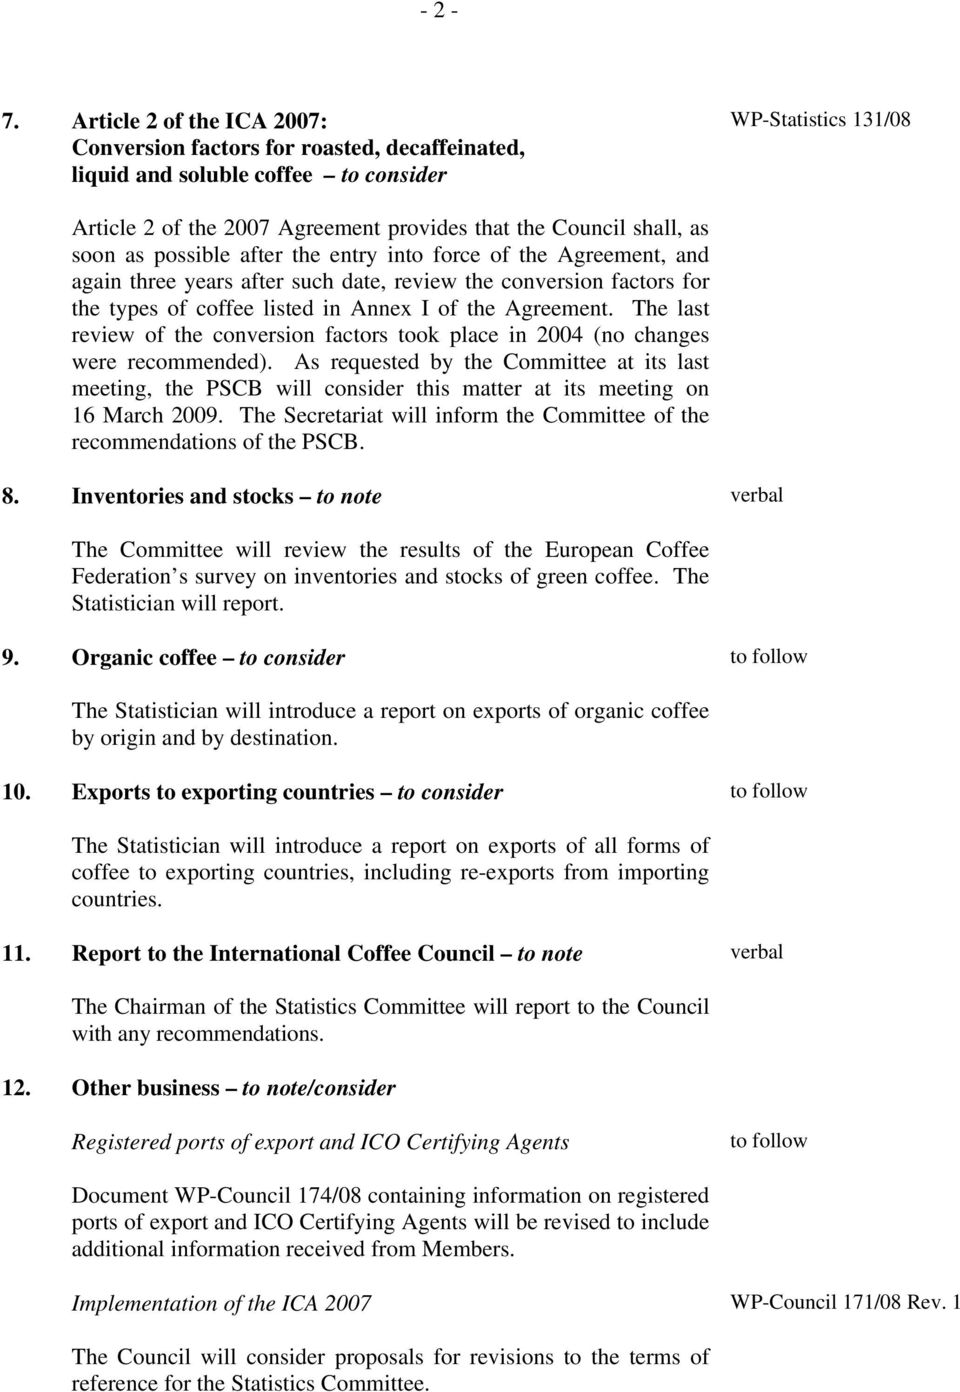 as soon as possible after the entry into force of the Agreement, and again three years after such date, review the conversion factors for the types of coffee listed in Annex I of the Agreement.